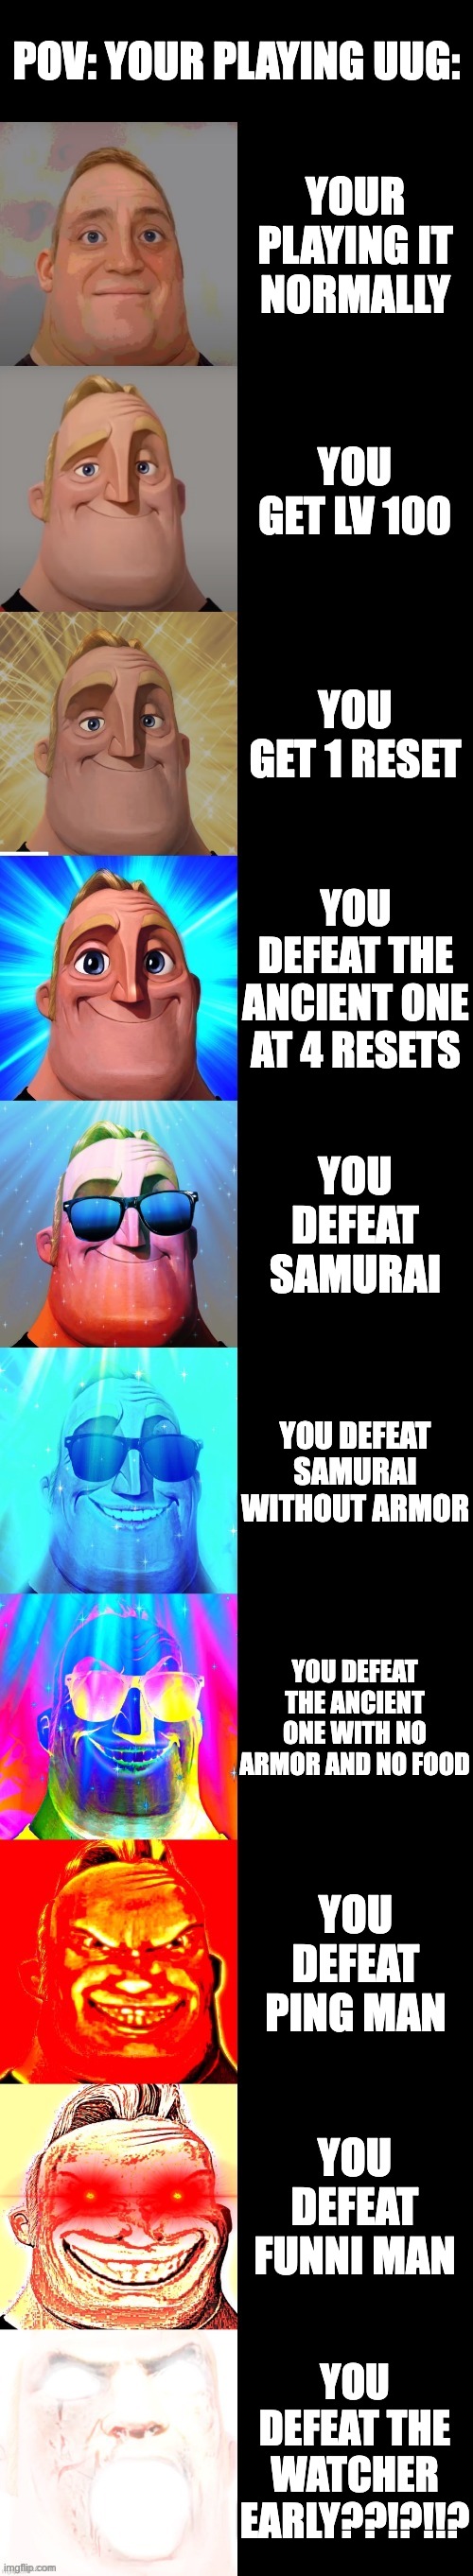 imagine | POV: YOUR PLAYING UUG:; YOUR PLAYING IT NORMALLY; YOU GET LV 100; YOU GET 1 RESET; YOU DEFEAT THE ANCIENT ONE AT 4 RESETS; YOU DEFEAT SAMURAI; YOU DEFEAT SAMURAI WITHOUT ARMOR; YOU DEFEAT THE ANCIENT ONE WITH NO ARMOR AND NO FOOD; YOU DEFEAT PING MAN; YOU DEFEAT FUNNI MAN; YOU DEFEAT THE WATCHER EARLY??!?!!? | image tagged in mr incredible becoming canny | made w/ Imgflip meme maker